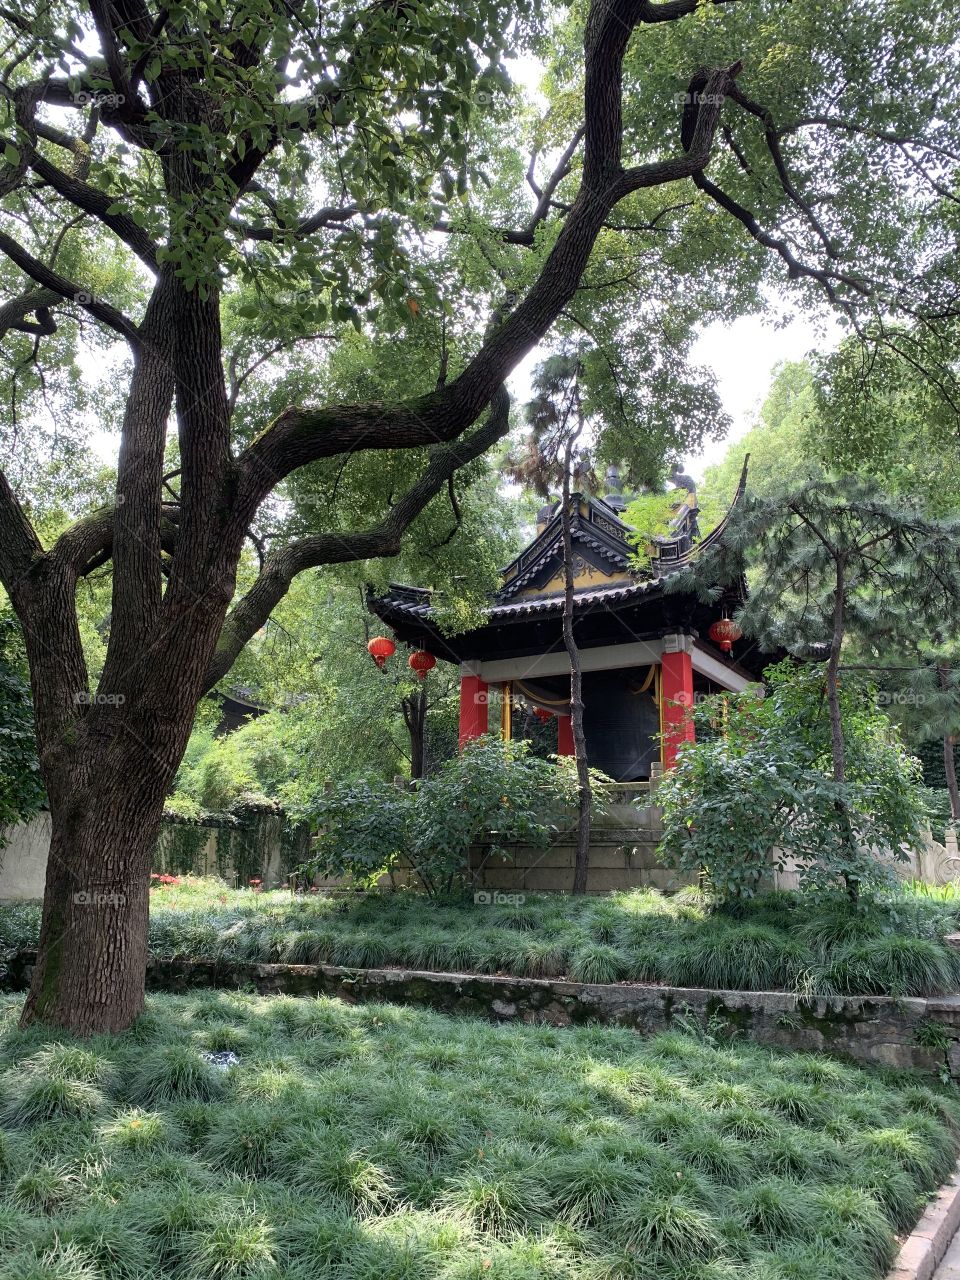 Wuxi - beautiful gardens in the old town - a place to experience some even more beautiful than the Suzhou gardens